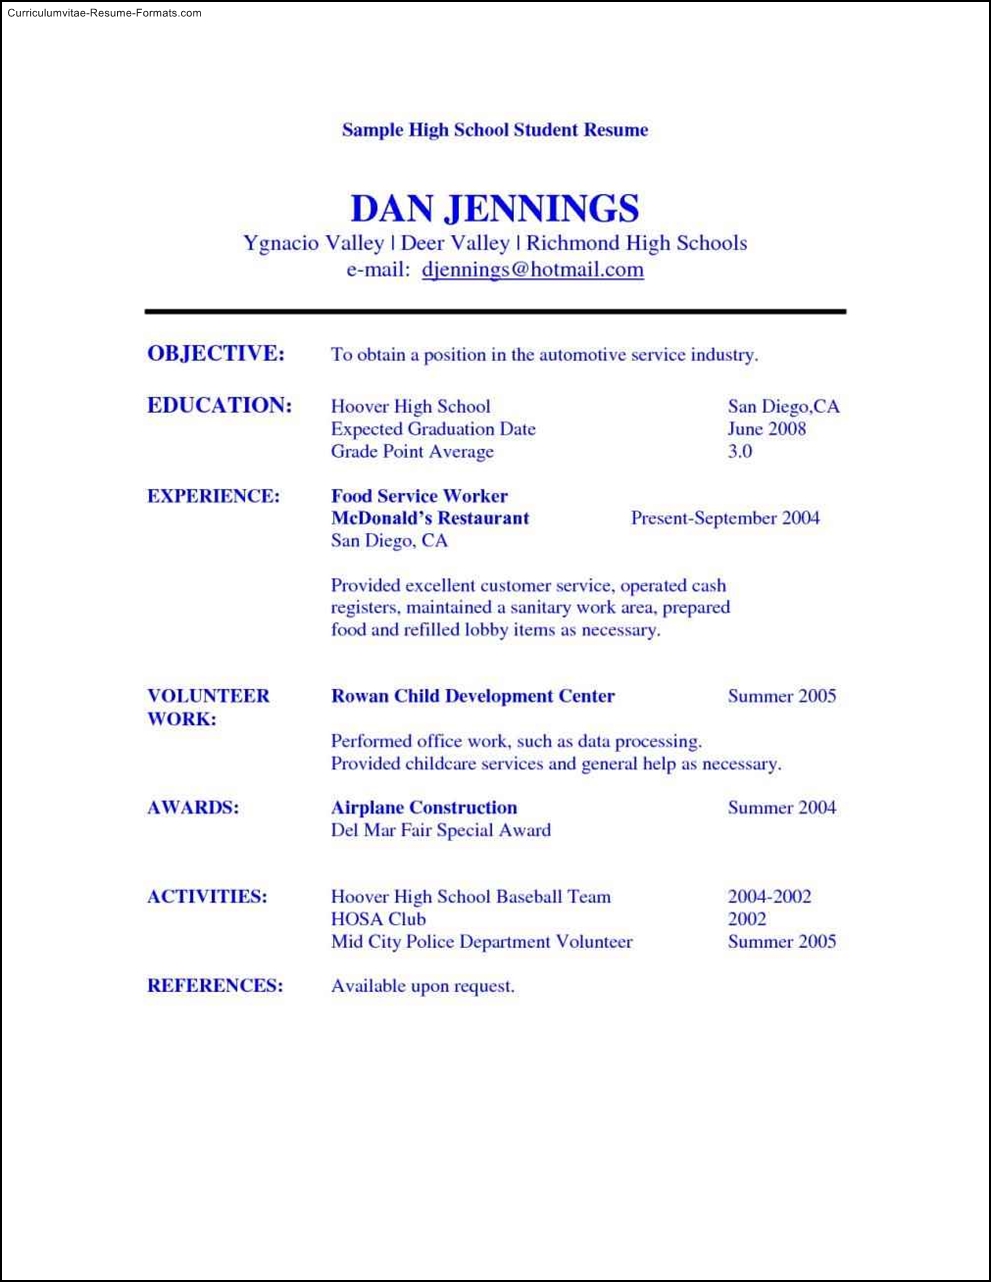 High School Student Resume Templates Free Samples Examples Format Resume Curruculum